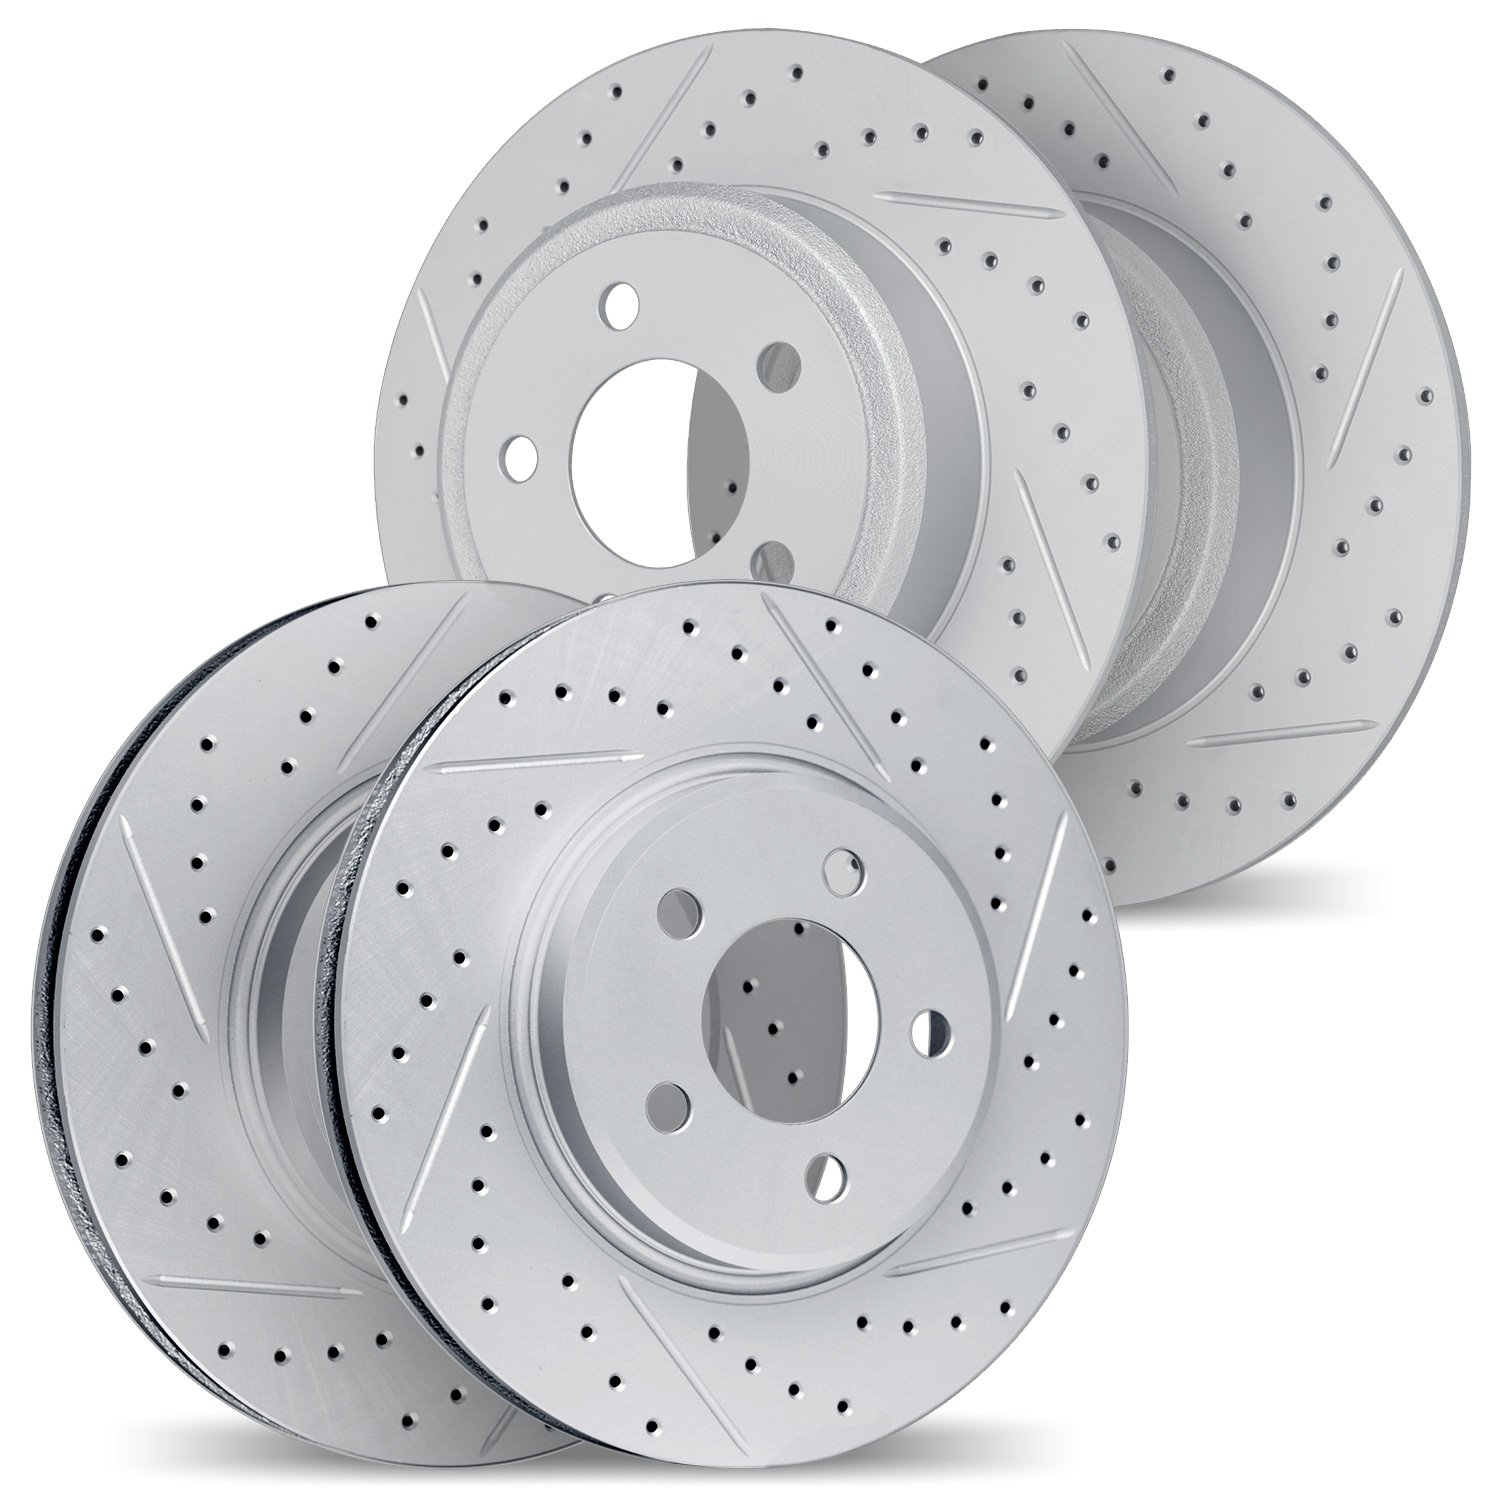 2004-80011 Geoperformance Drilled/Slotted Brake Rotors, Fits Select Ford/Lincoln/Mercury/Mazda, Position: Front and Rear